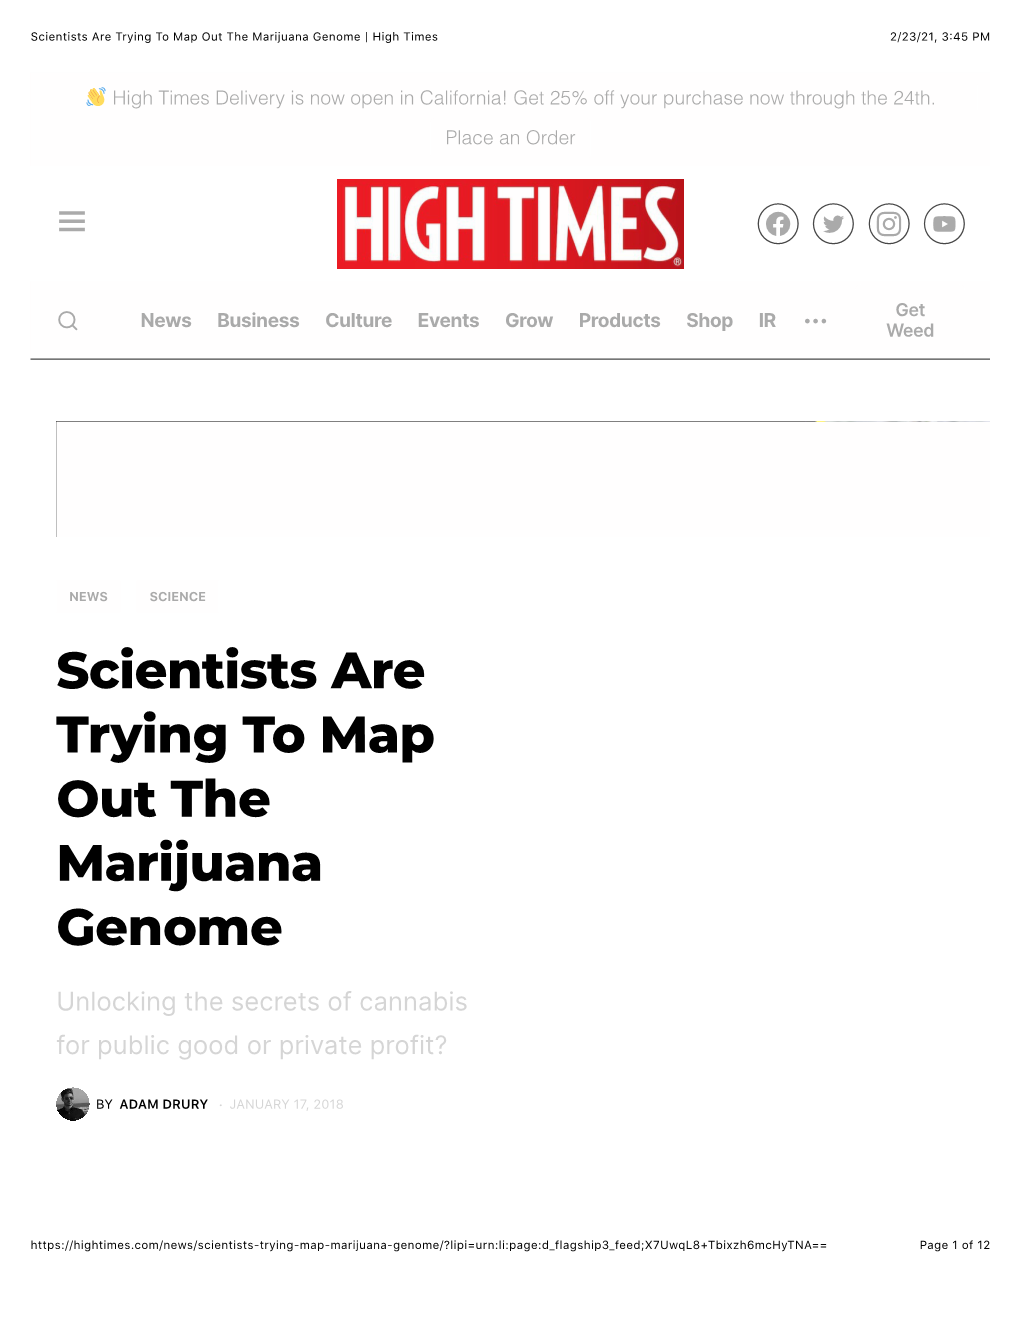 Scientists Are Trying to Map out the Marijuana Genome | High Times 2/23/21, 3:45 PM